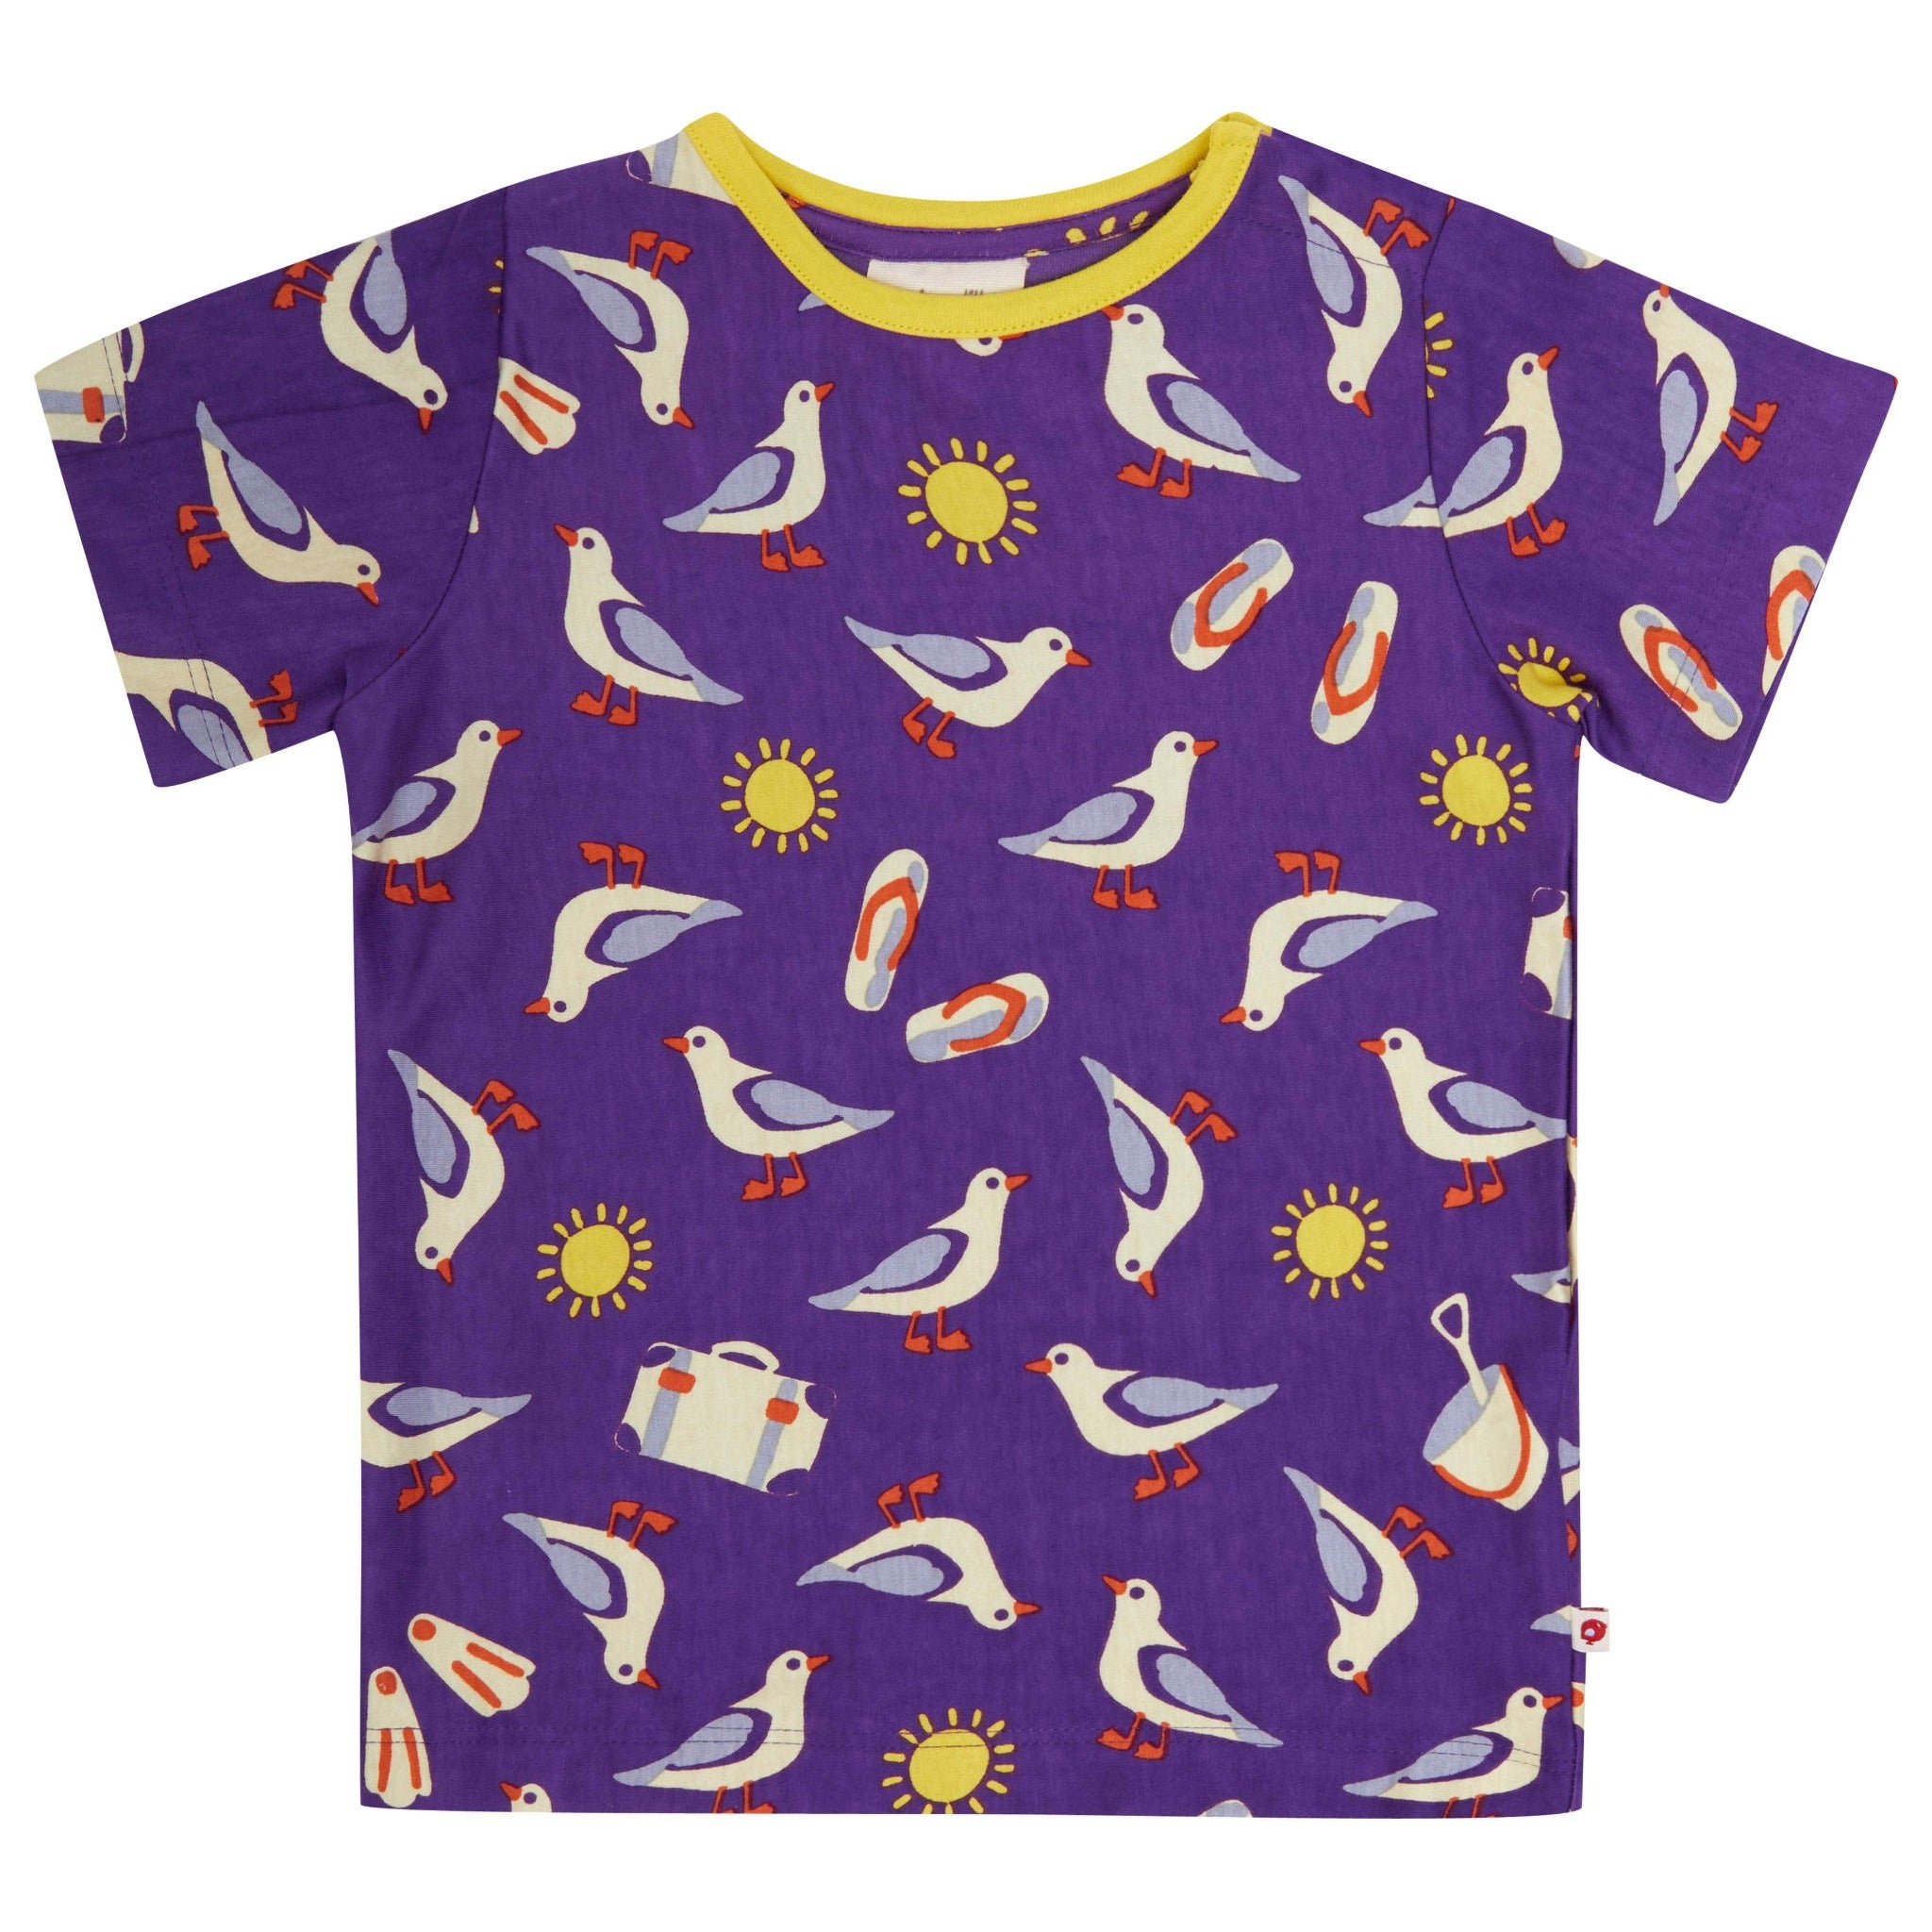 Piccalilly all over print seagulls t-shirt